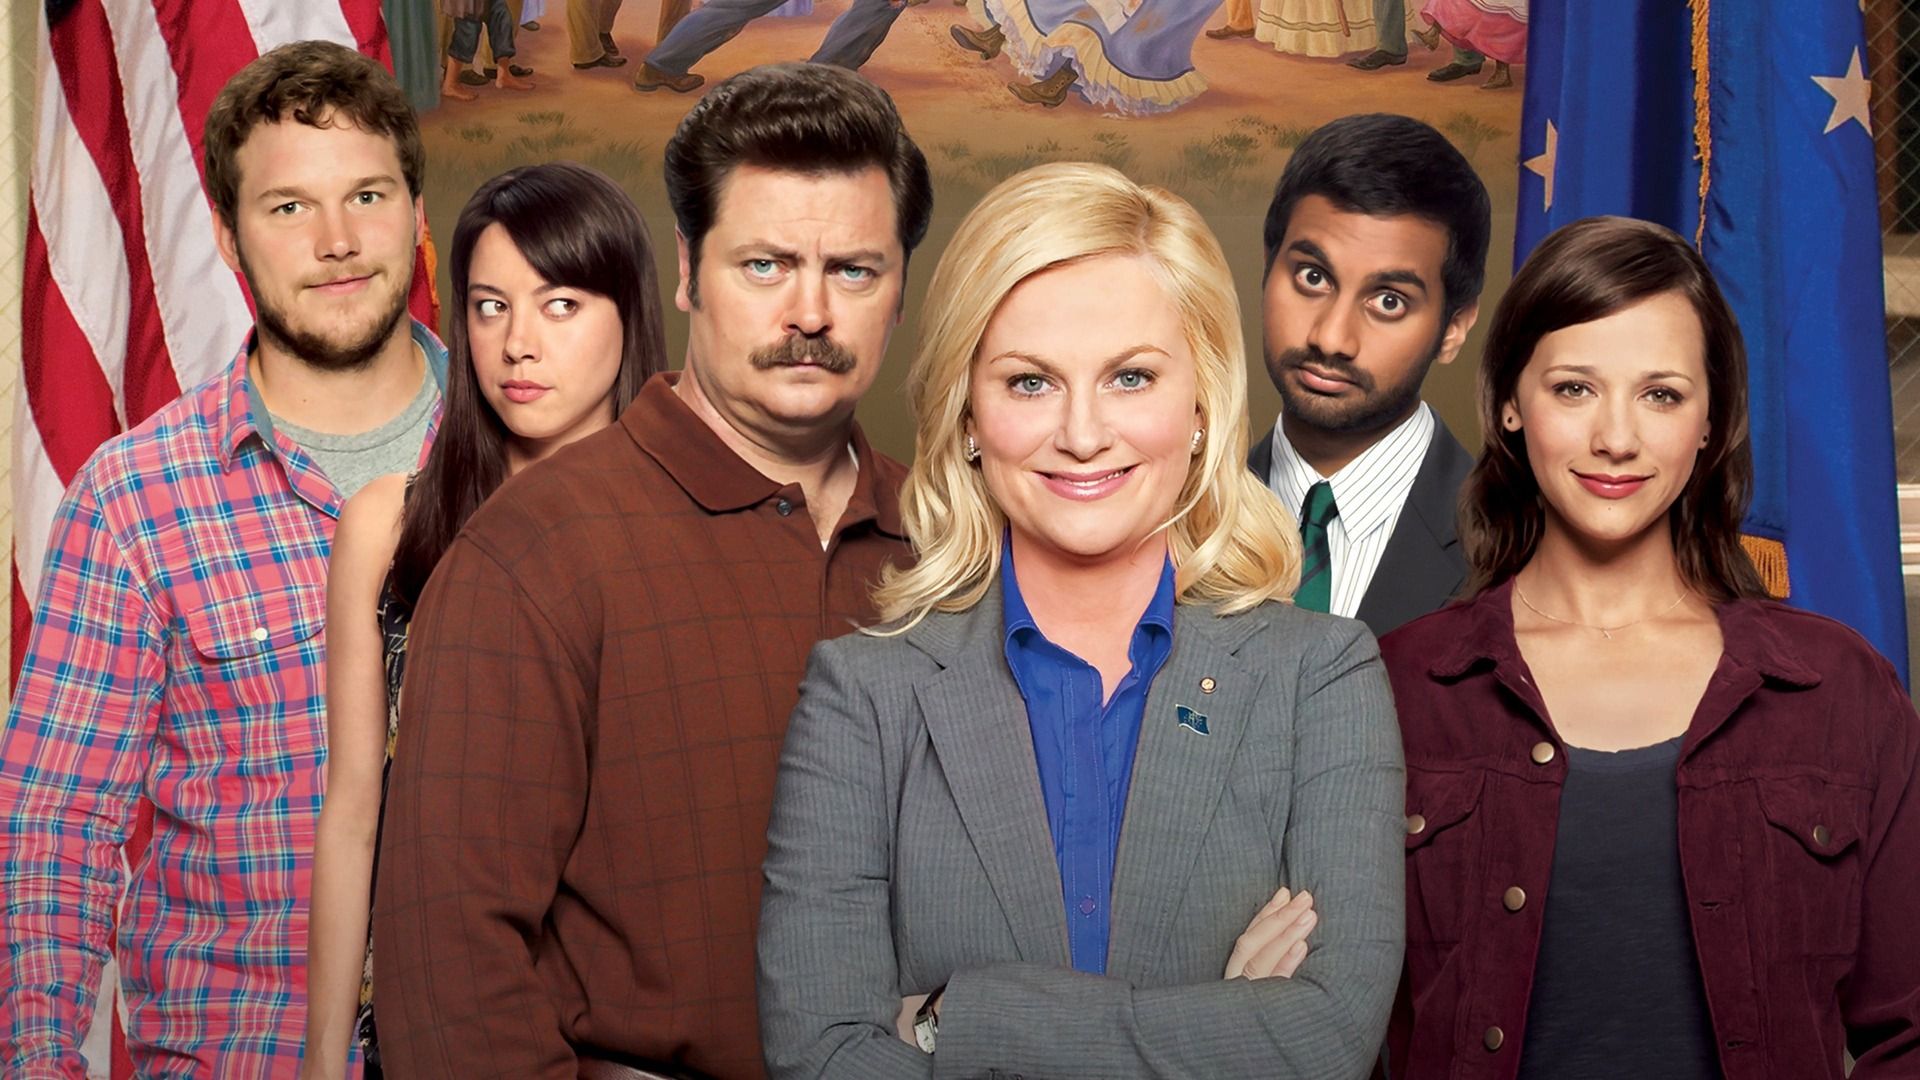 Parks and Recreation background